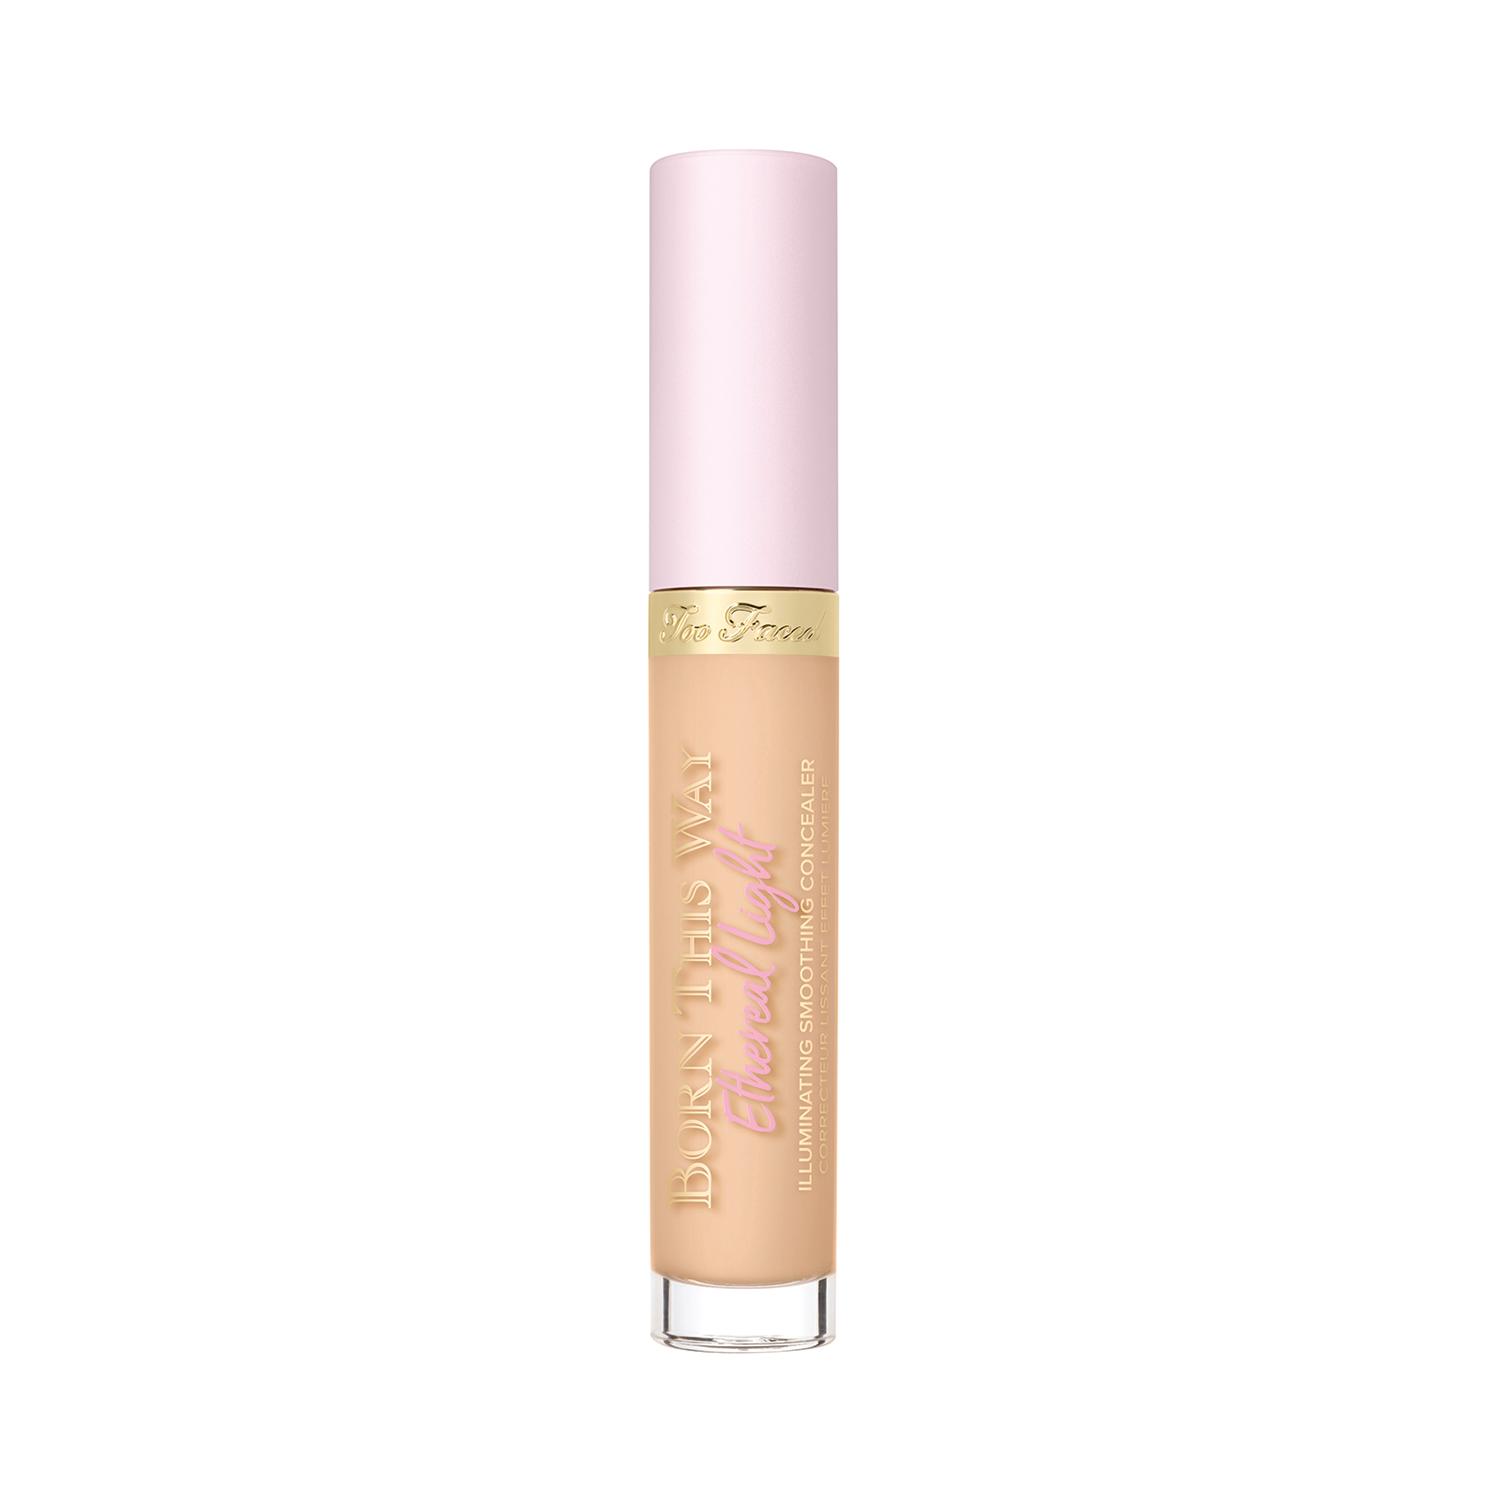 Too Faced | Too Faced Born This Way Illuminating Concealer - Pecan (5ml)